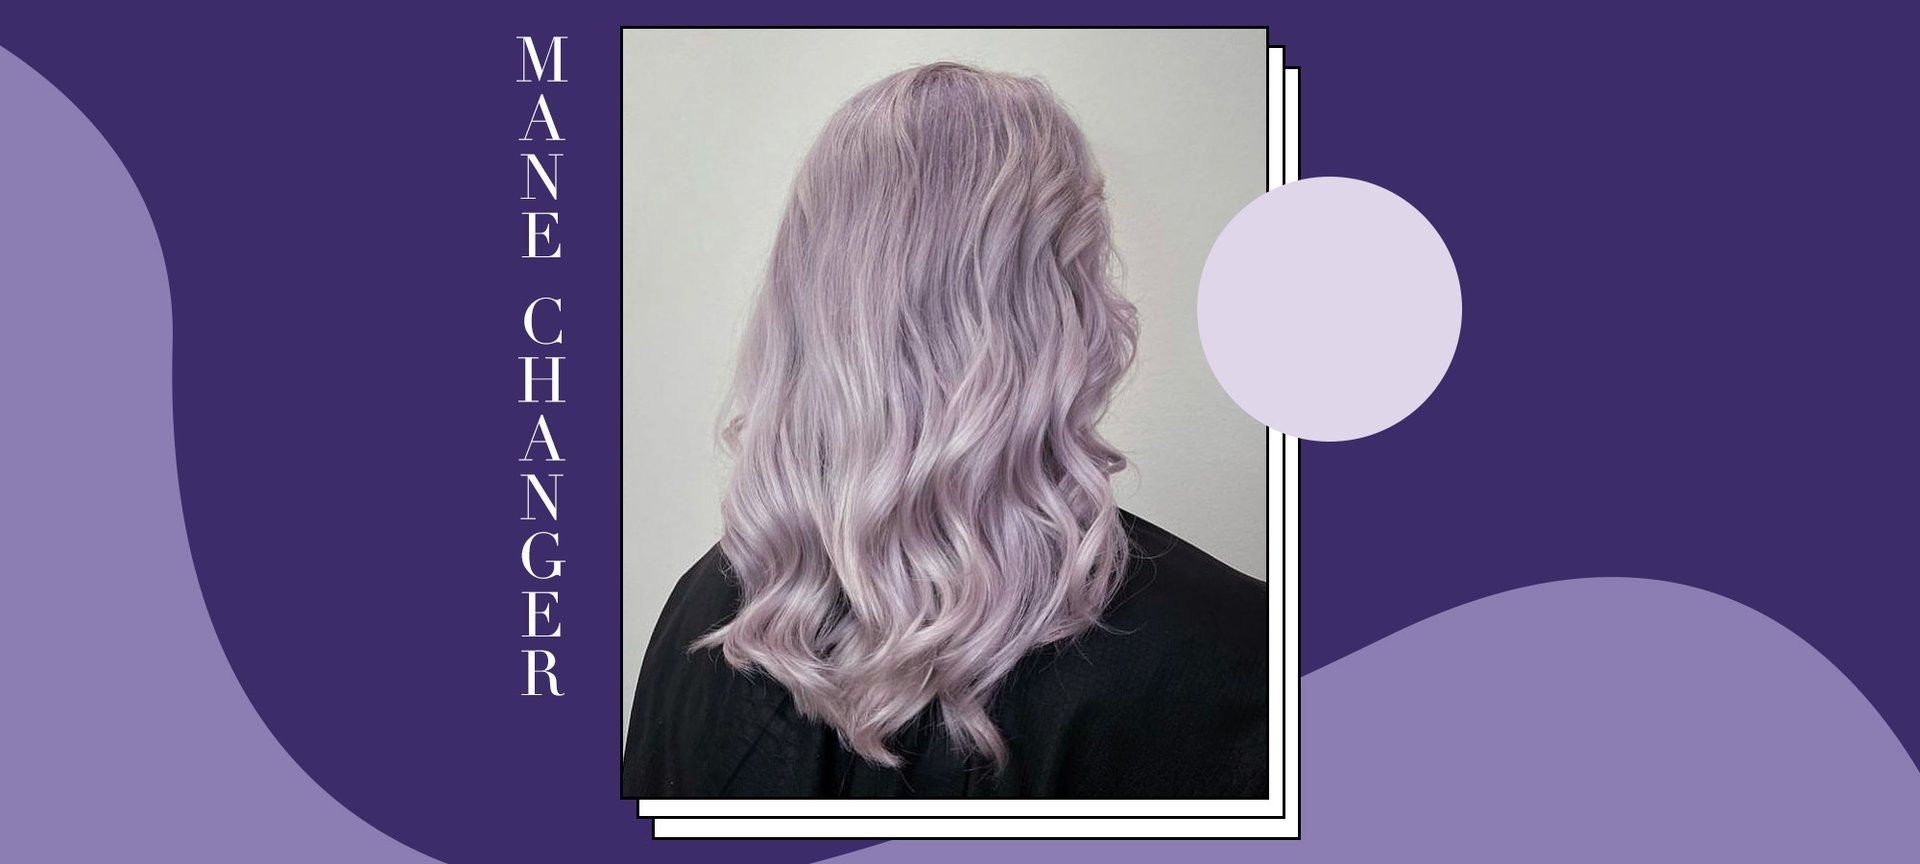 7. The Best Way to Transition from Faded Blue to Lavender Hair - wide 9